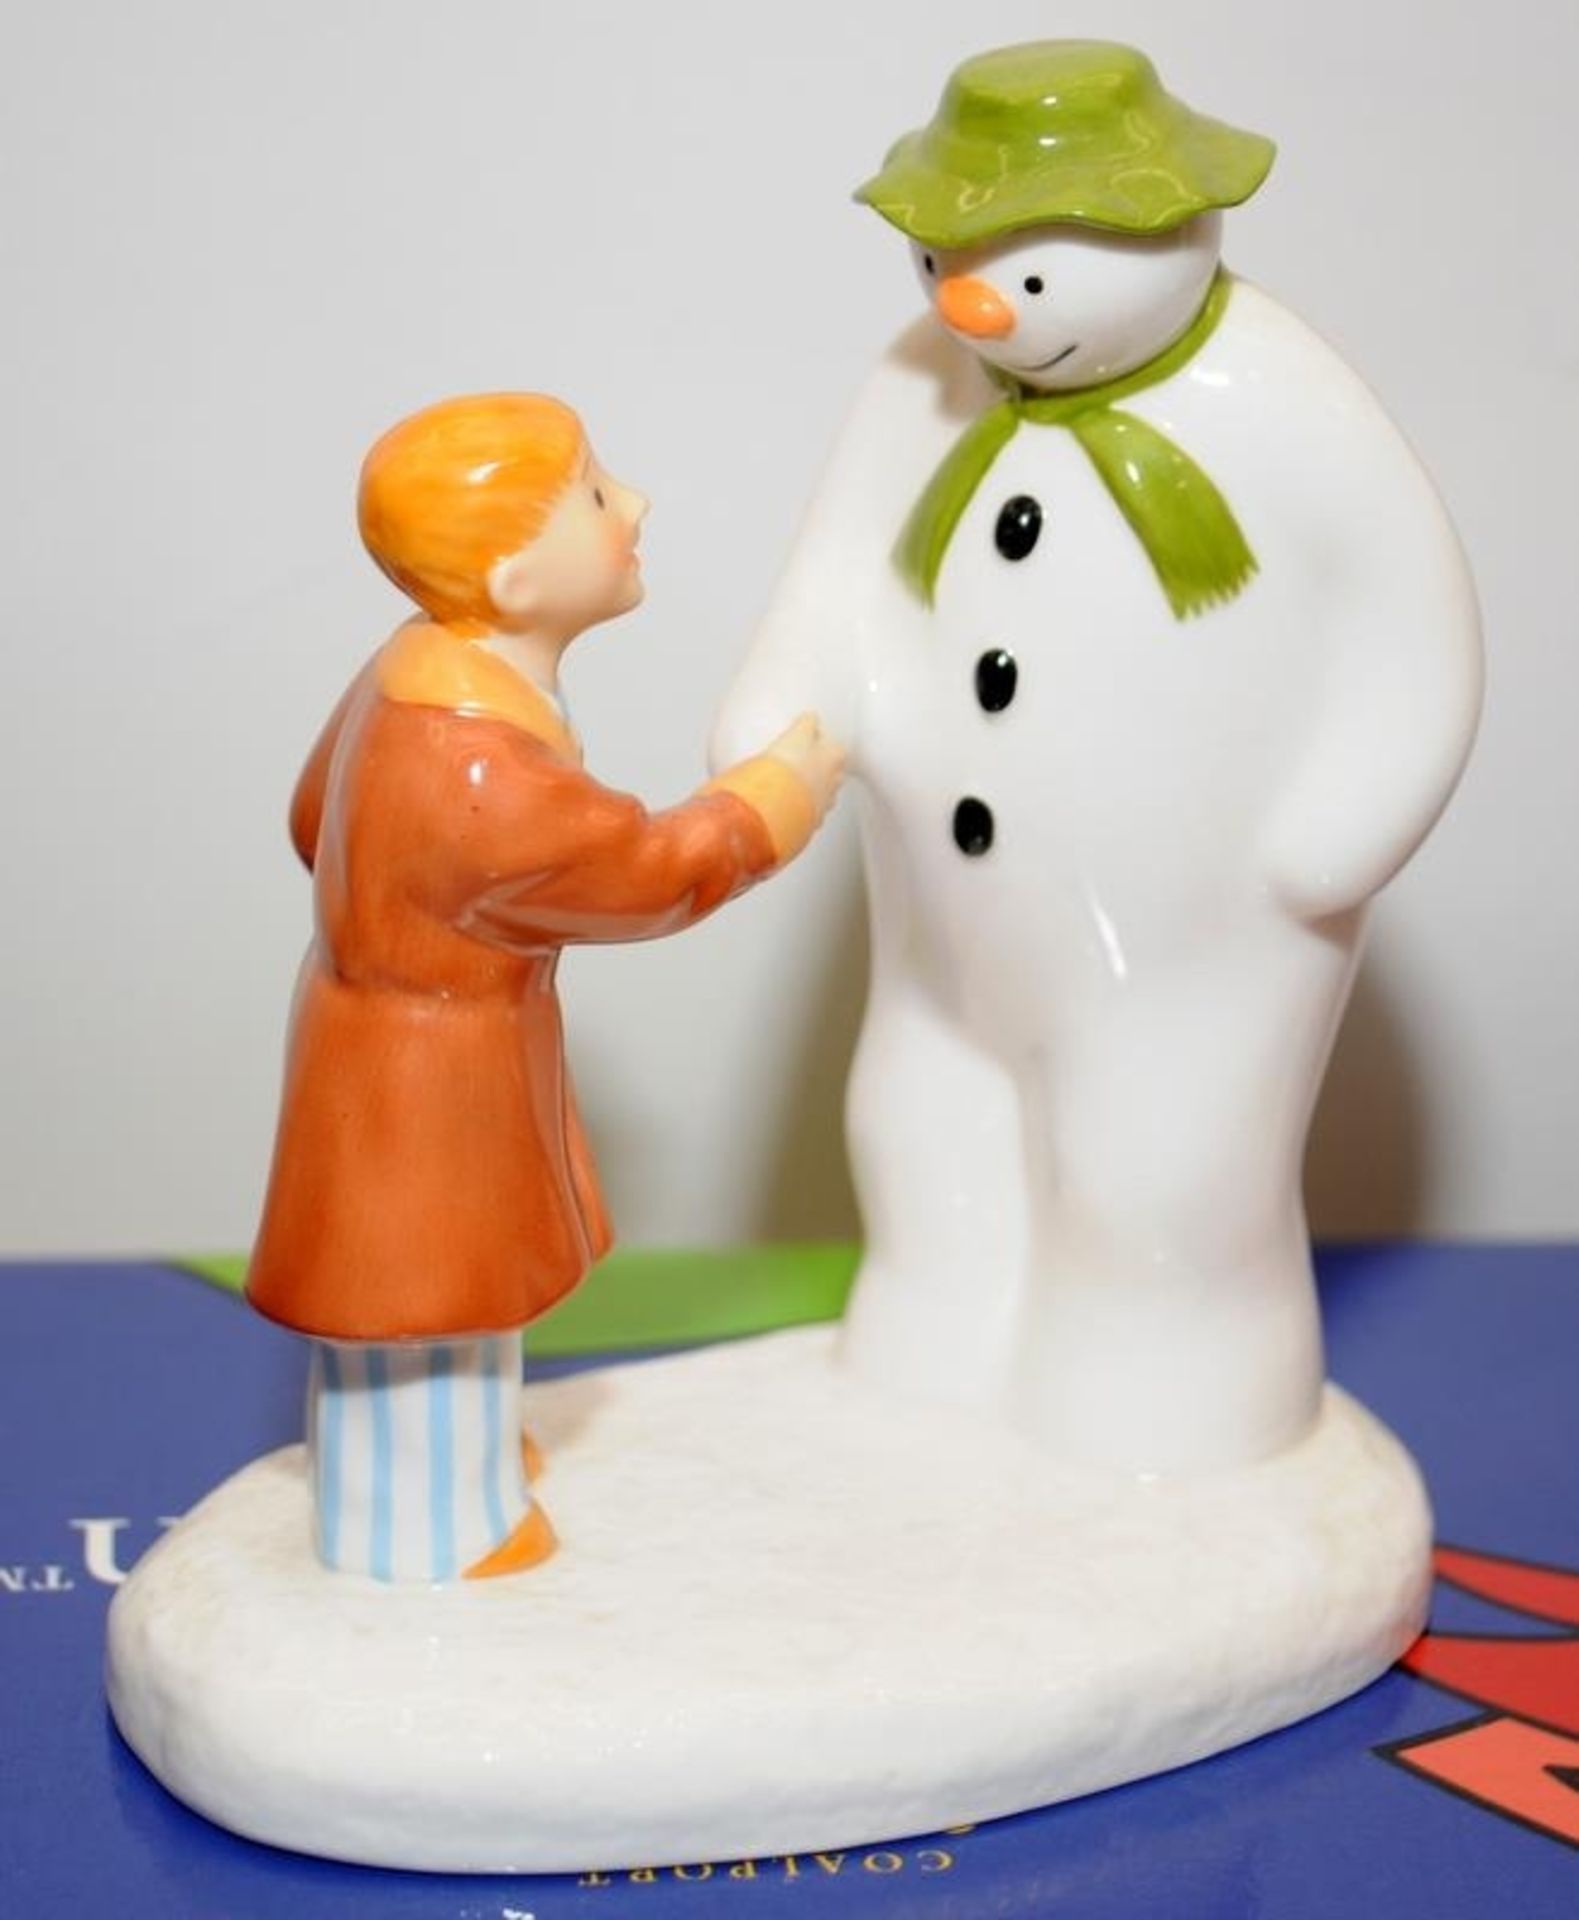 3 x Coalport The Snowman Figurines: Building The Snowman, The Hug and How Do You Do. All boxed - Image 4 of 5